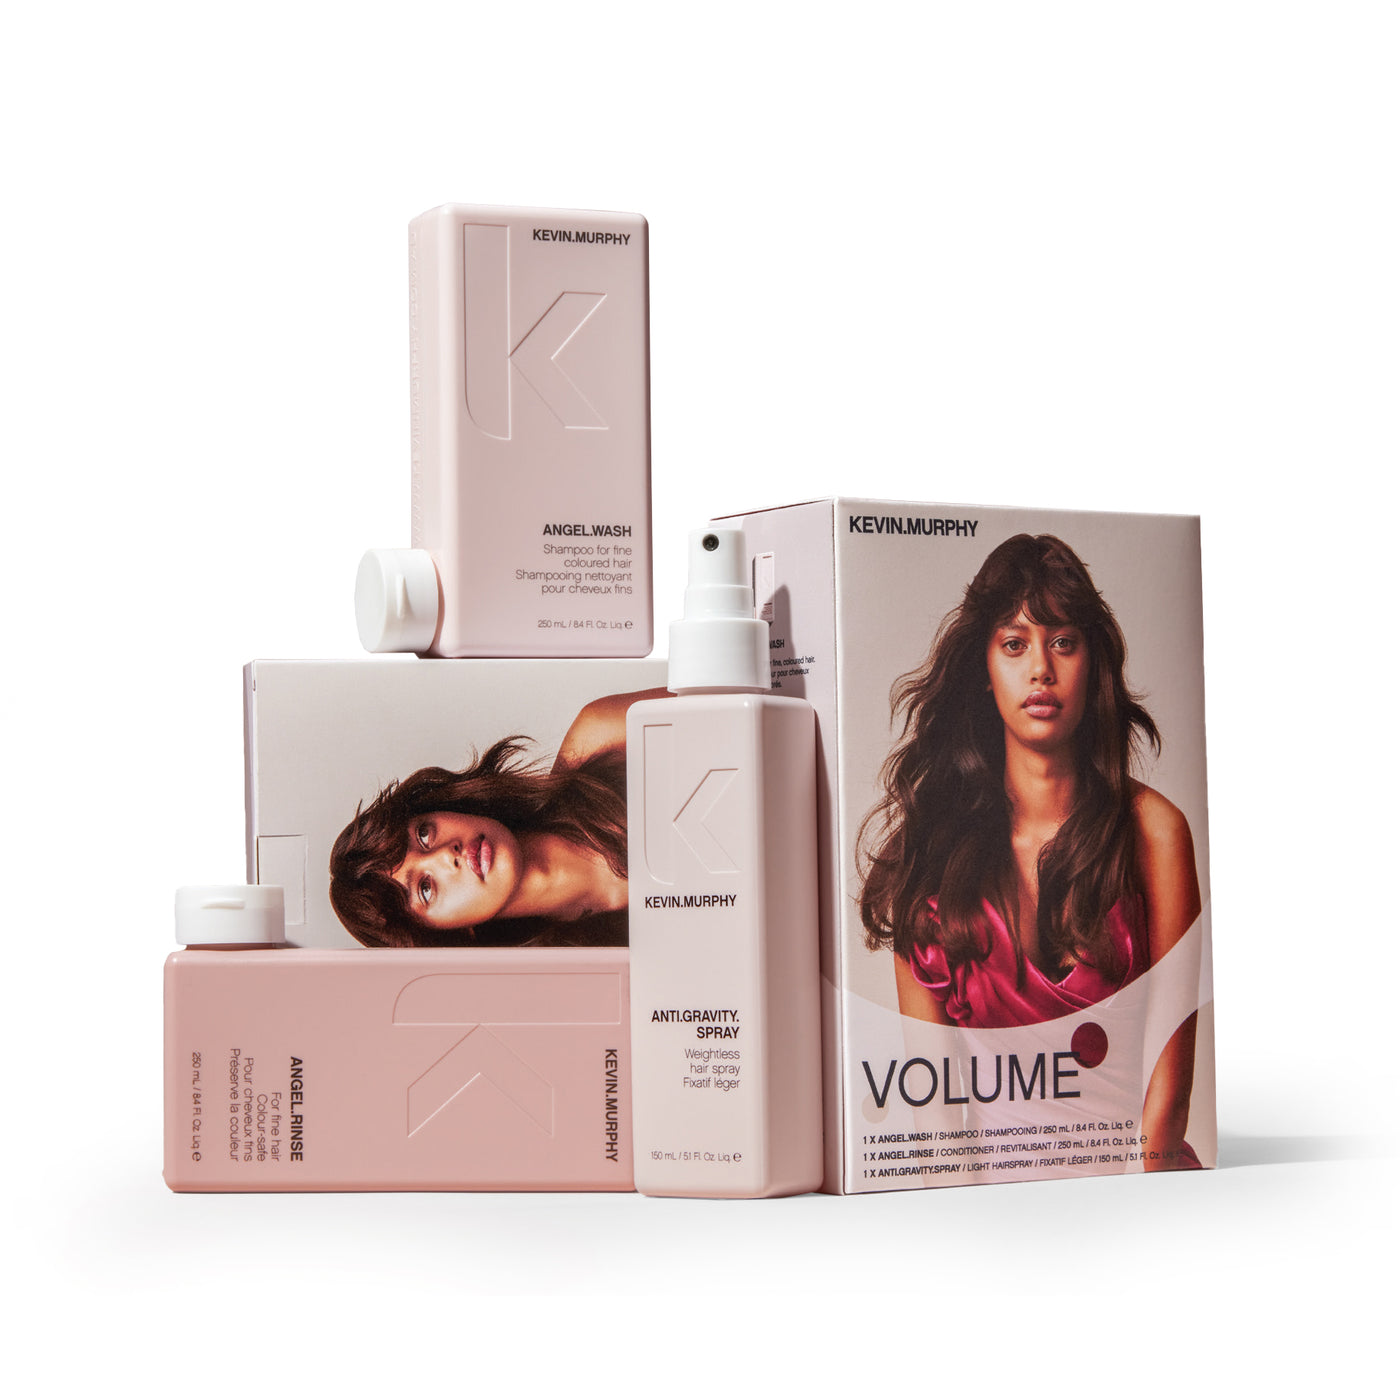 KEVIN.MURPHY Volume Pack